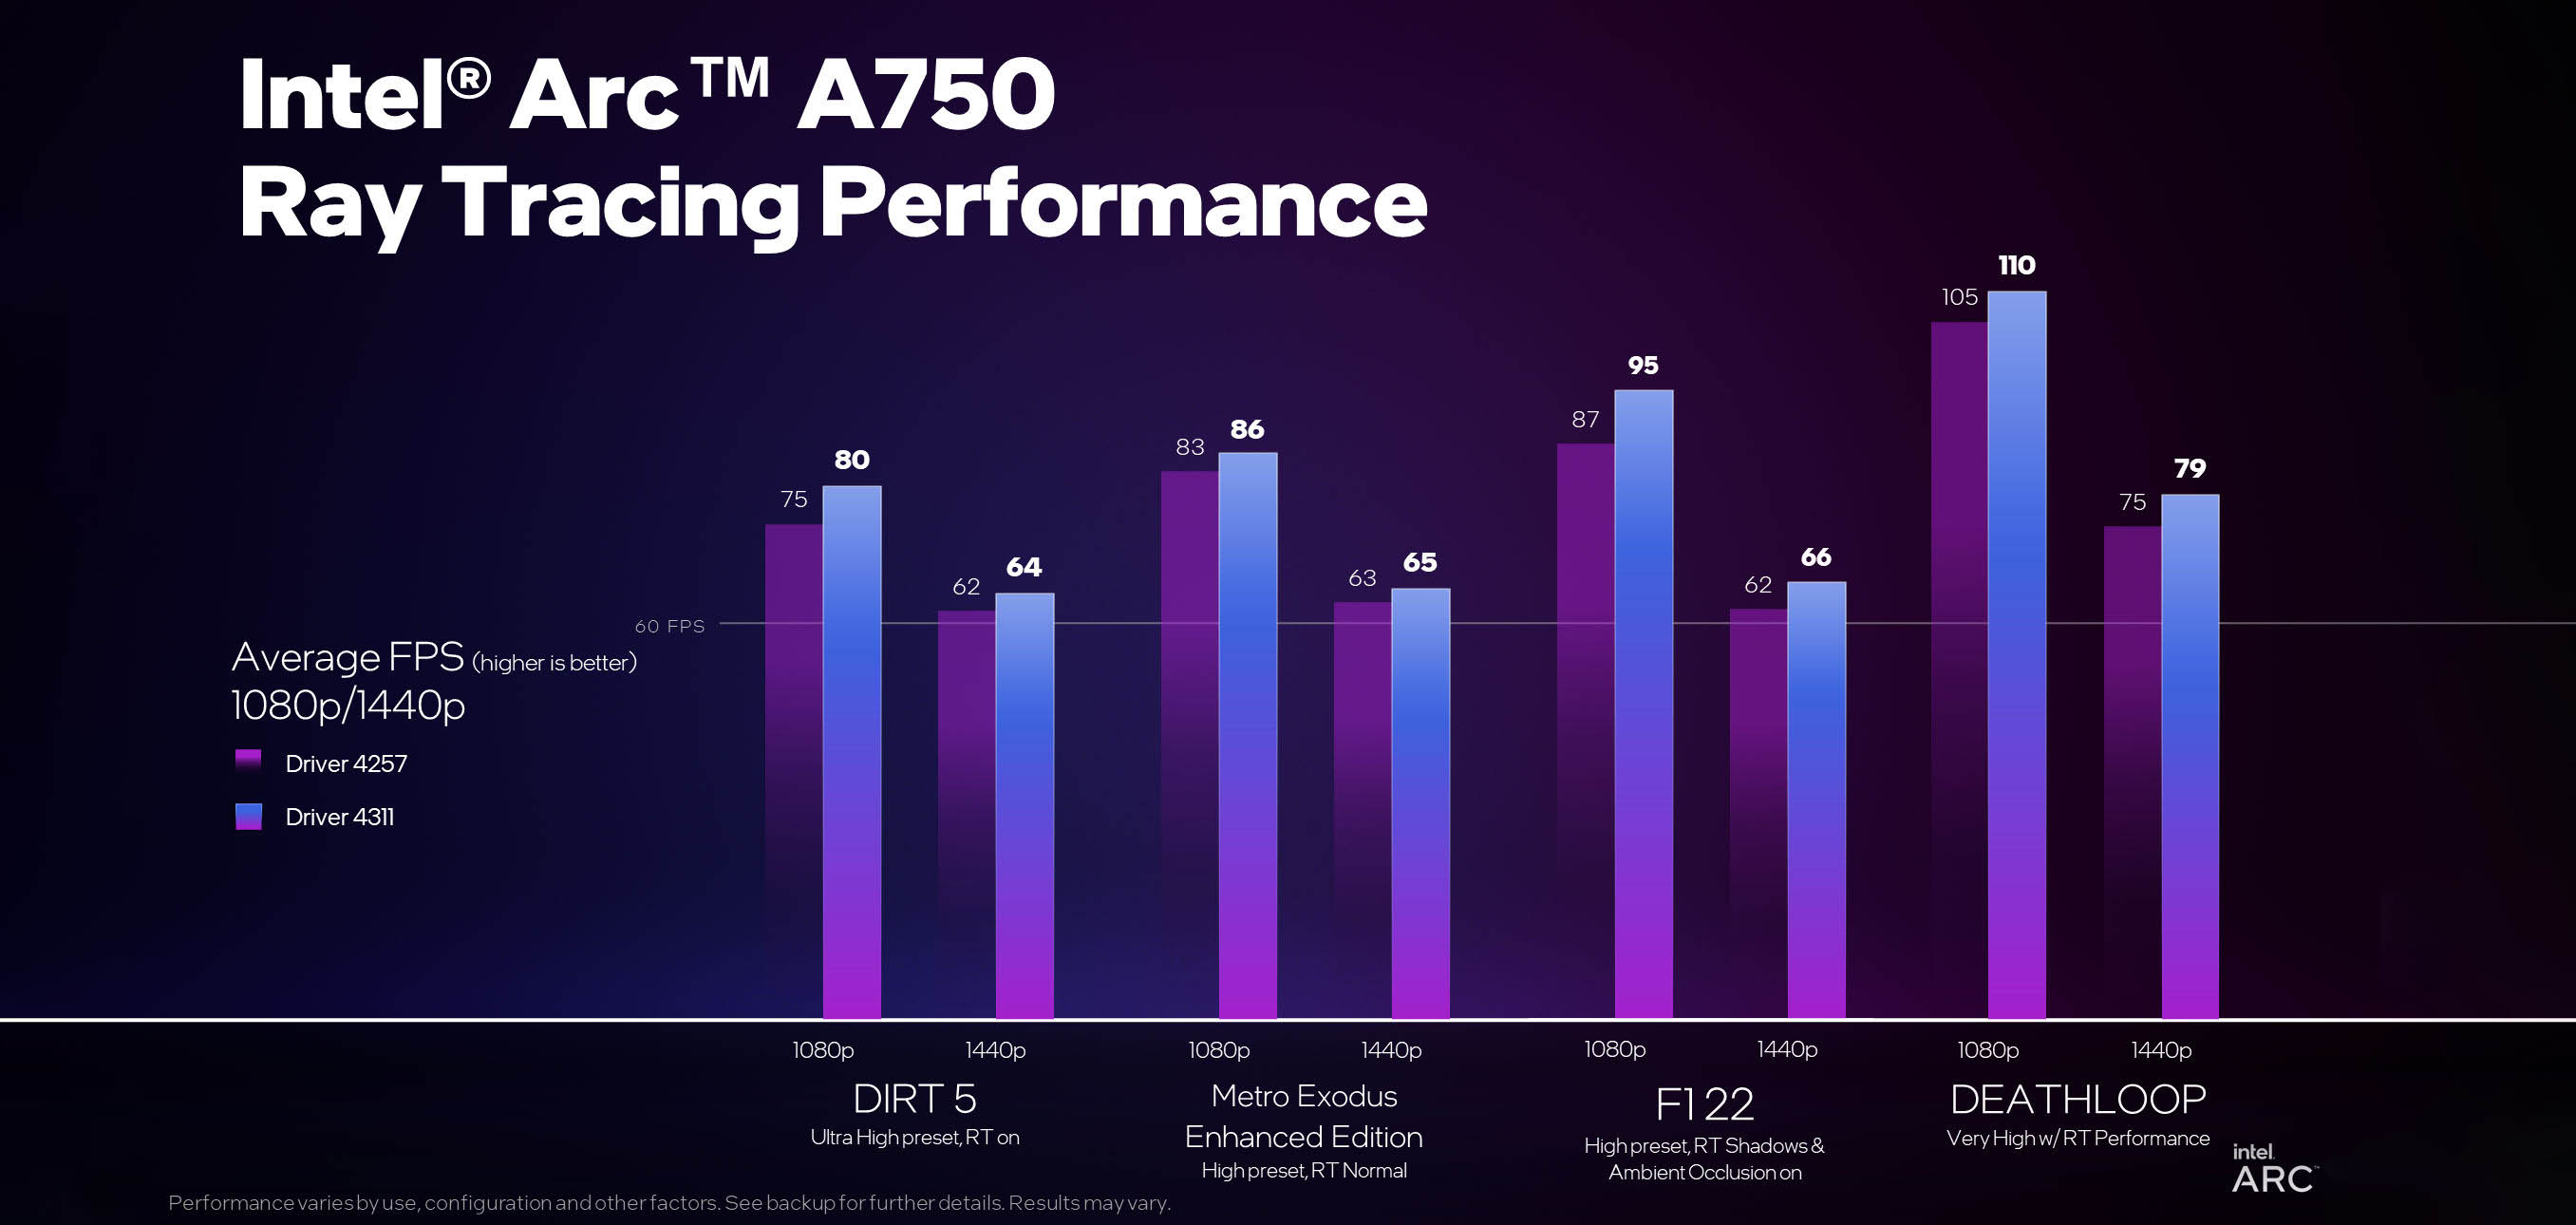 Ray tracing in F1 22 is not worth the penalty to performance